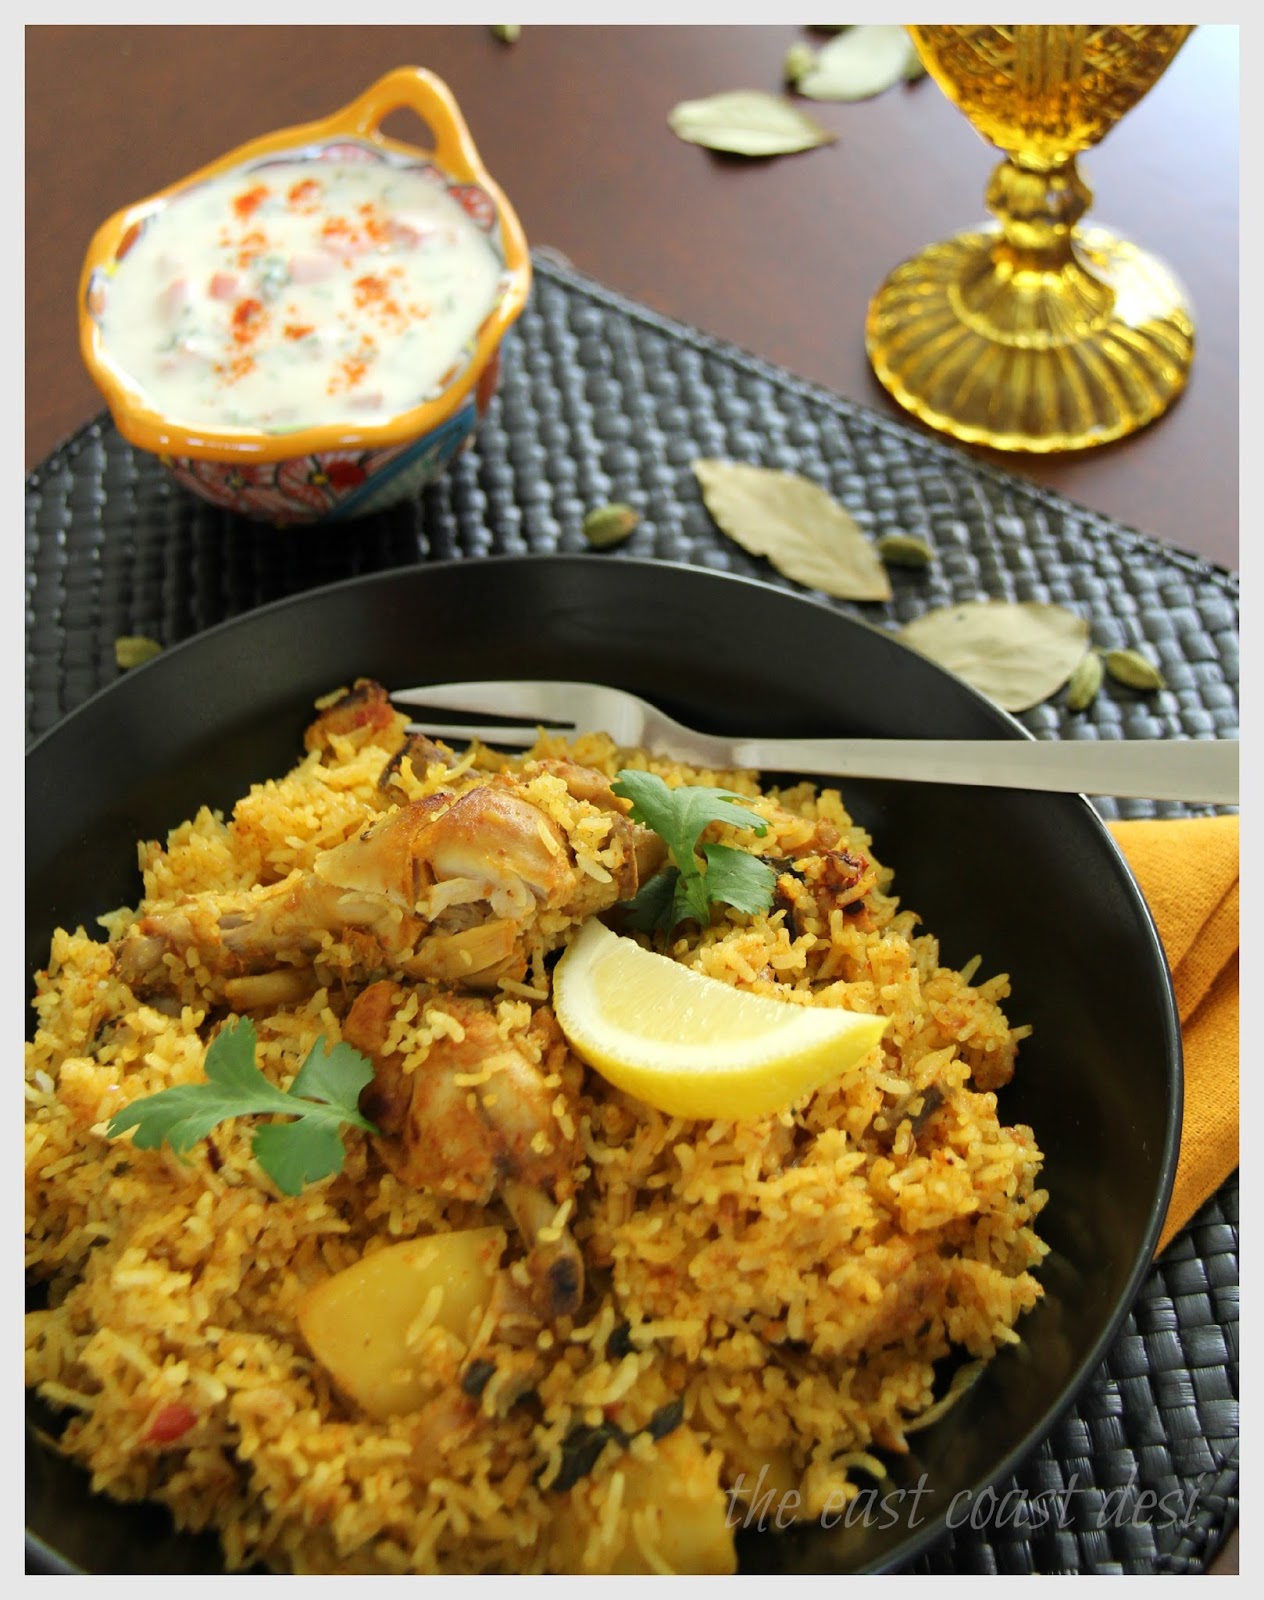 the east coast desi: Spicy Chicken Bombay Biryani - Nothing less than A ...